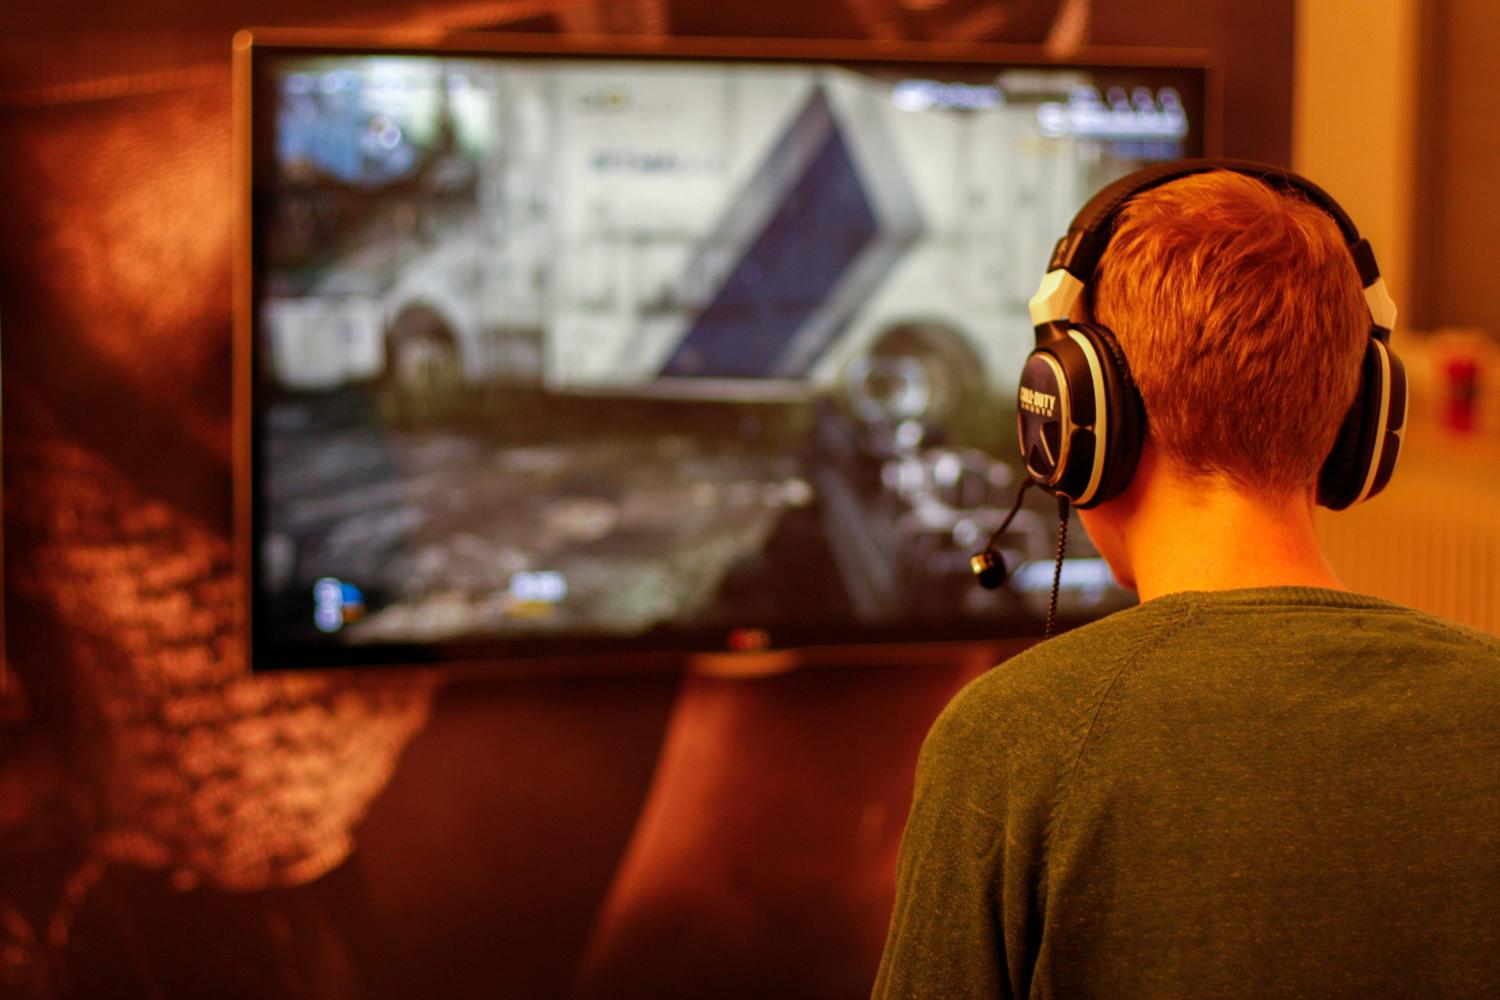 A gamer wearing headphones plays the Call of Duty first person shooter.